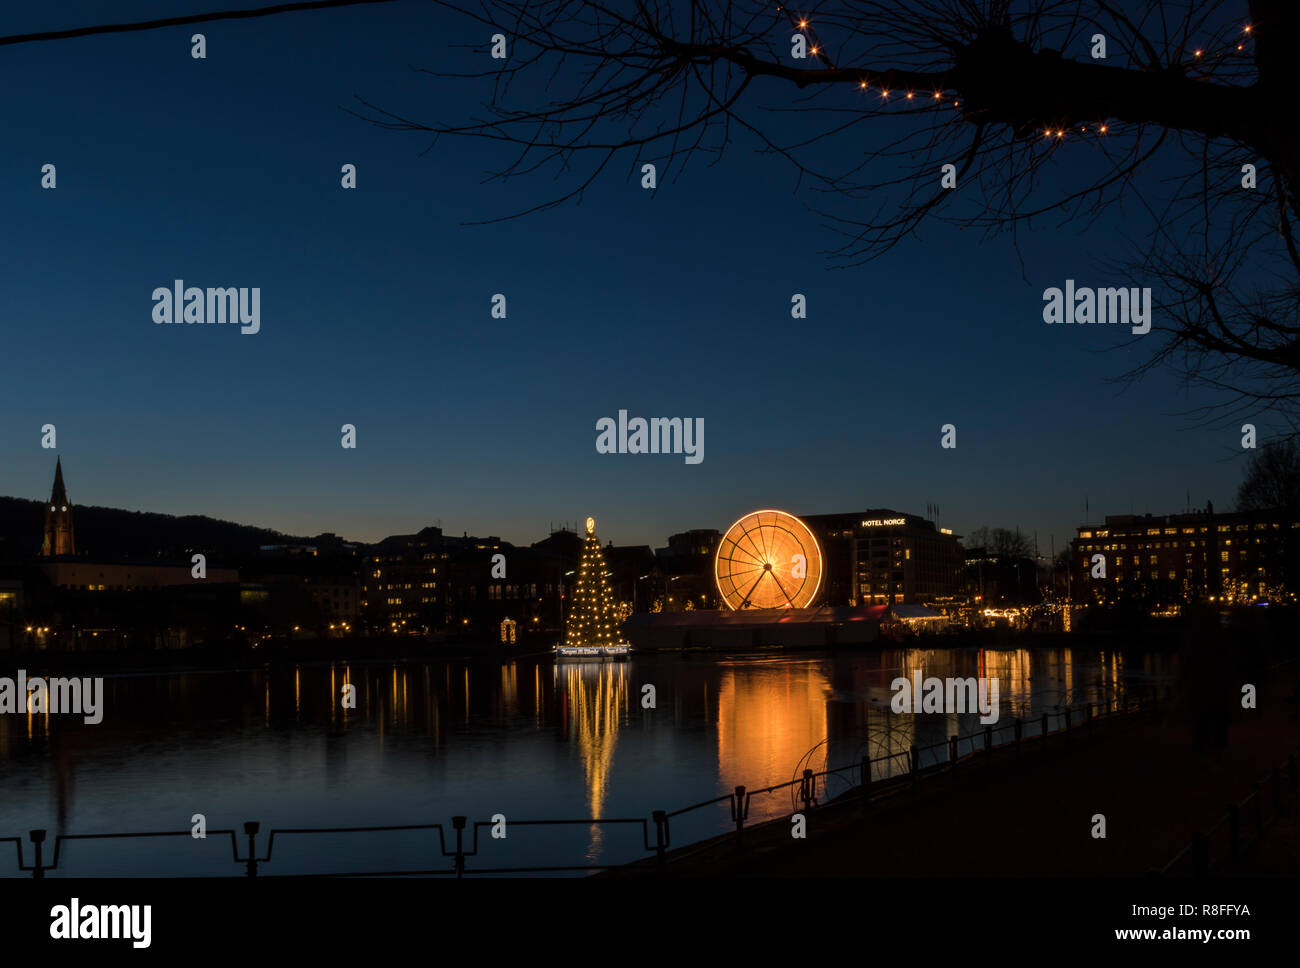 Christmas tree and Market by Lille Lungegaardsvannet Lake in downtown Bergen, Norway. Ferris wheel rotating. Stock Photo